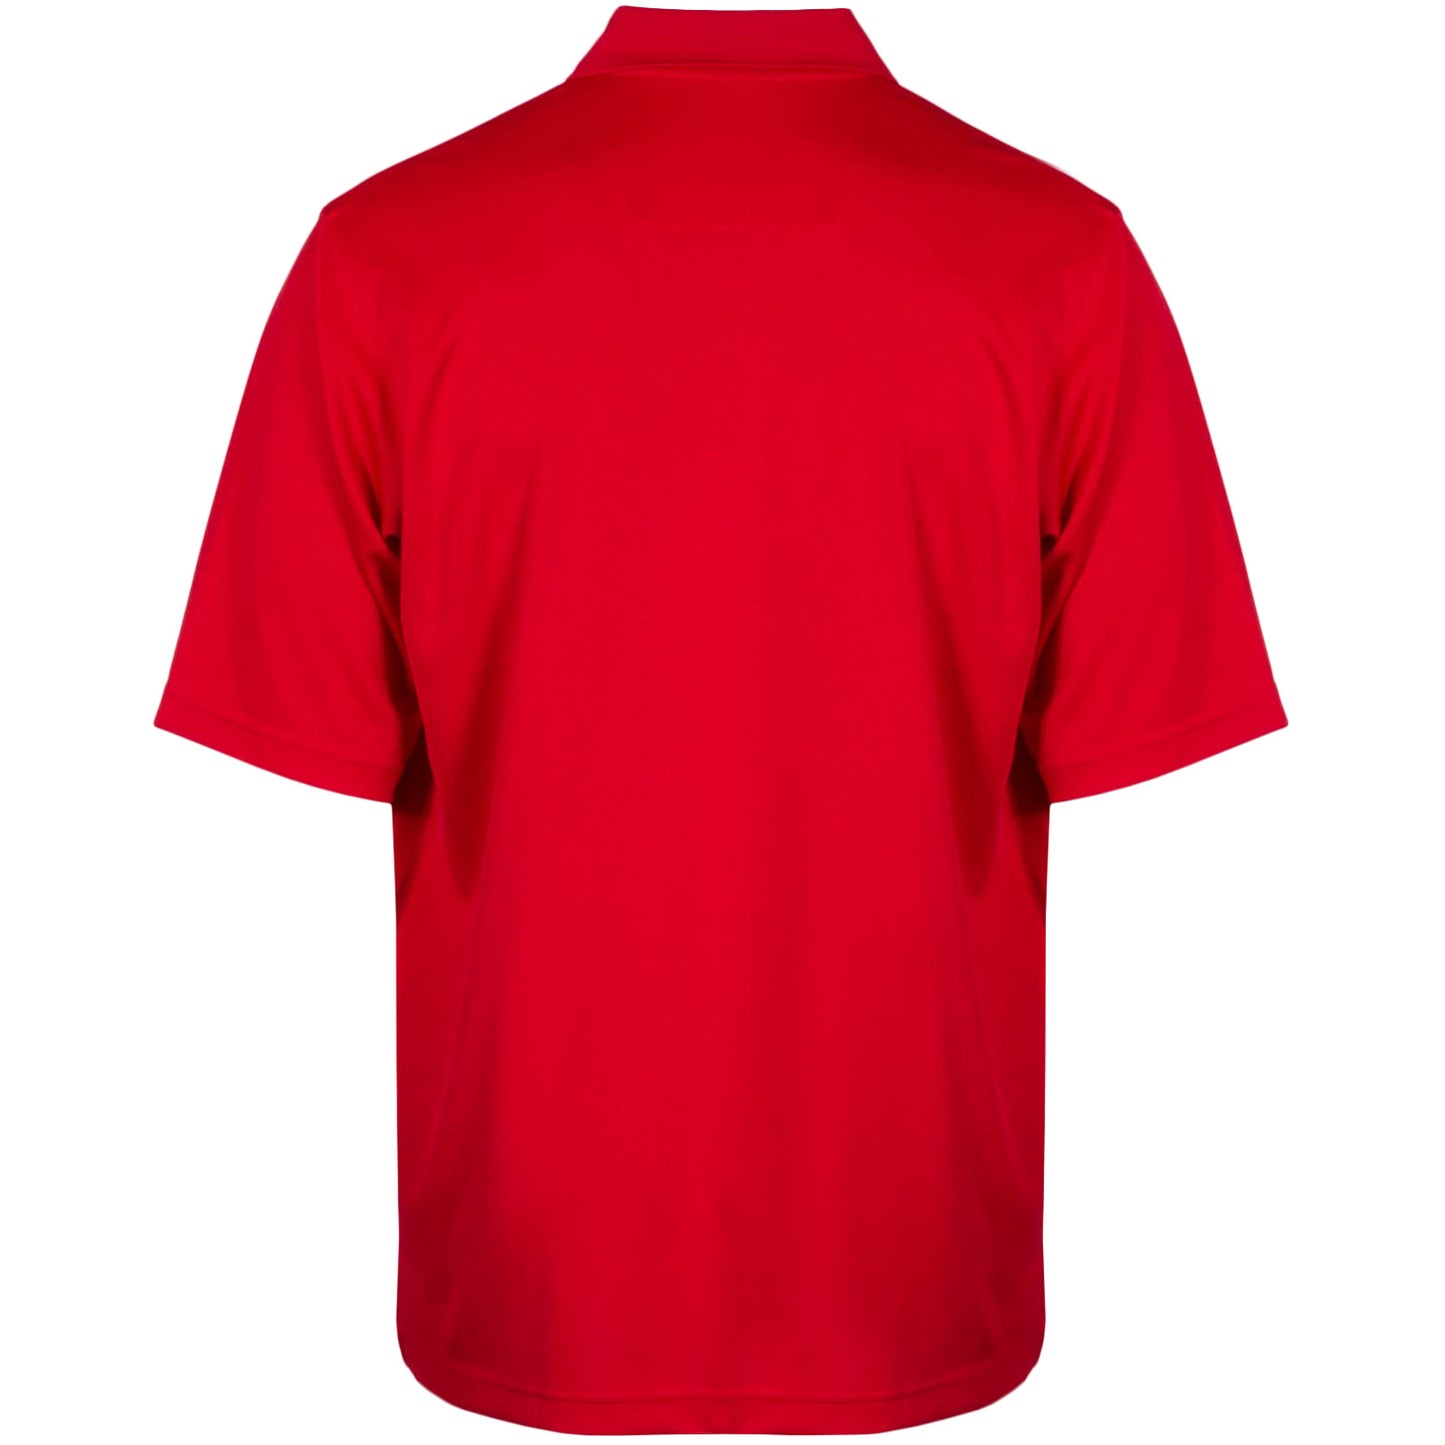 Chicago Bulls Men's Red Exceed Polo